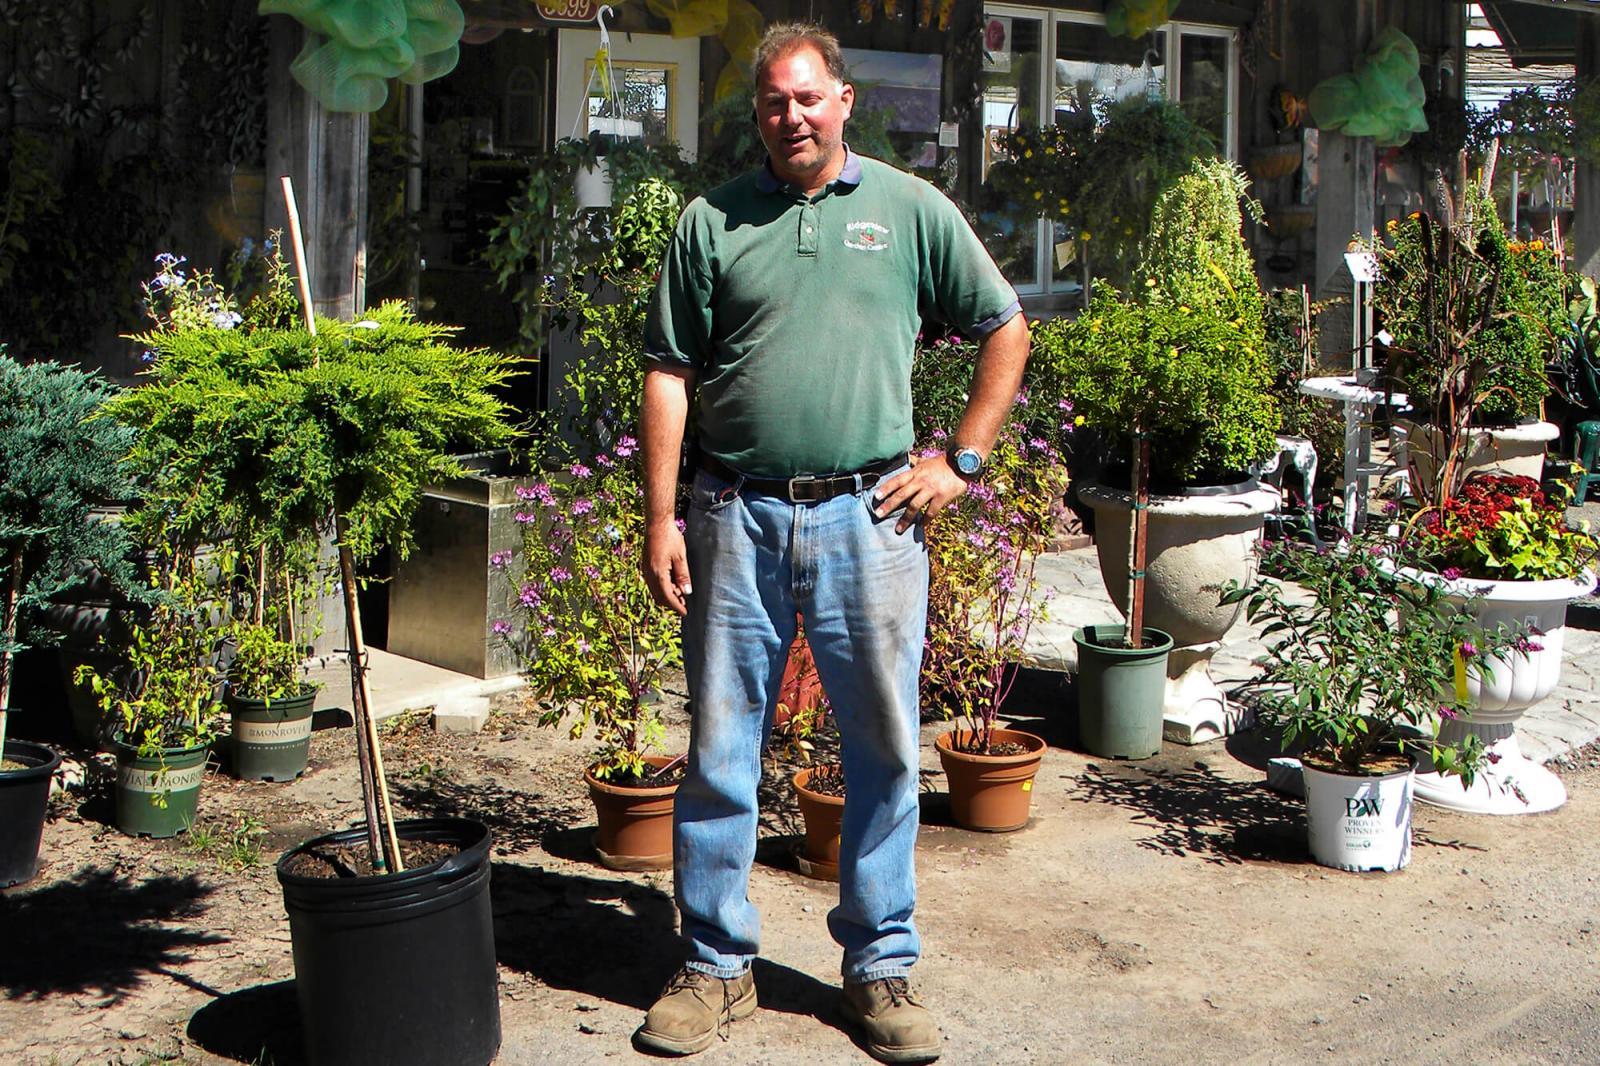 Ridgeview Garden Centre grows from a small fruit stand